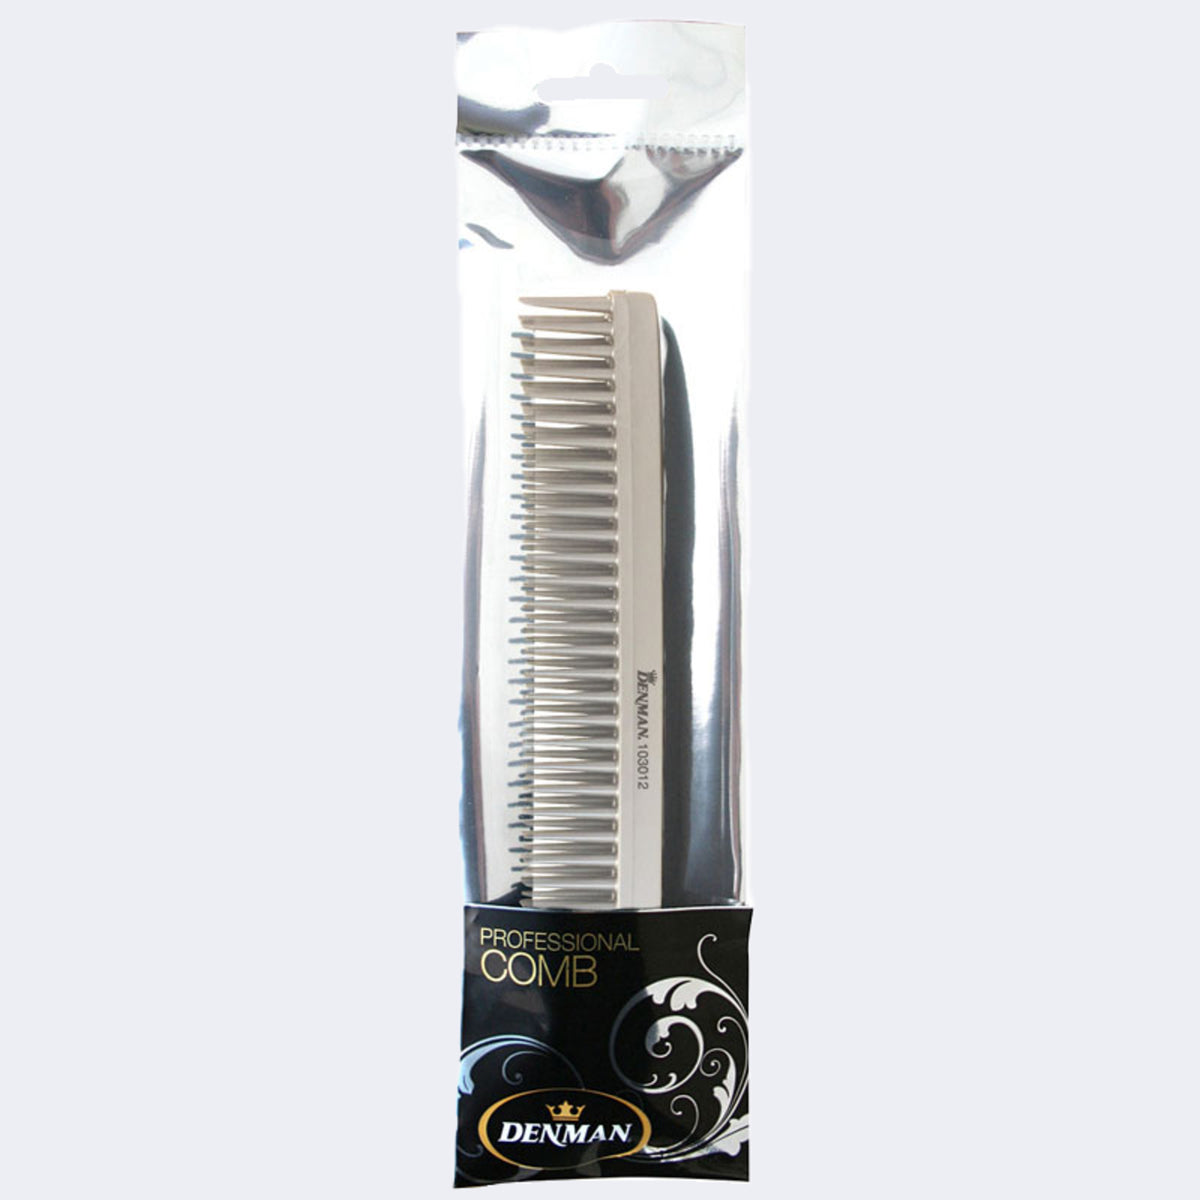 3-ROW STYLING COMB